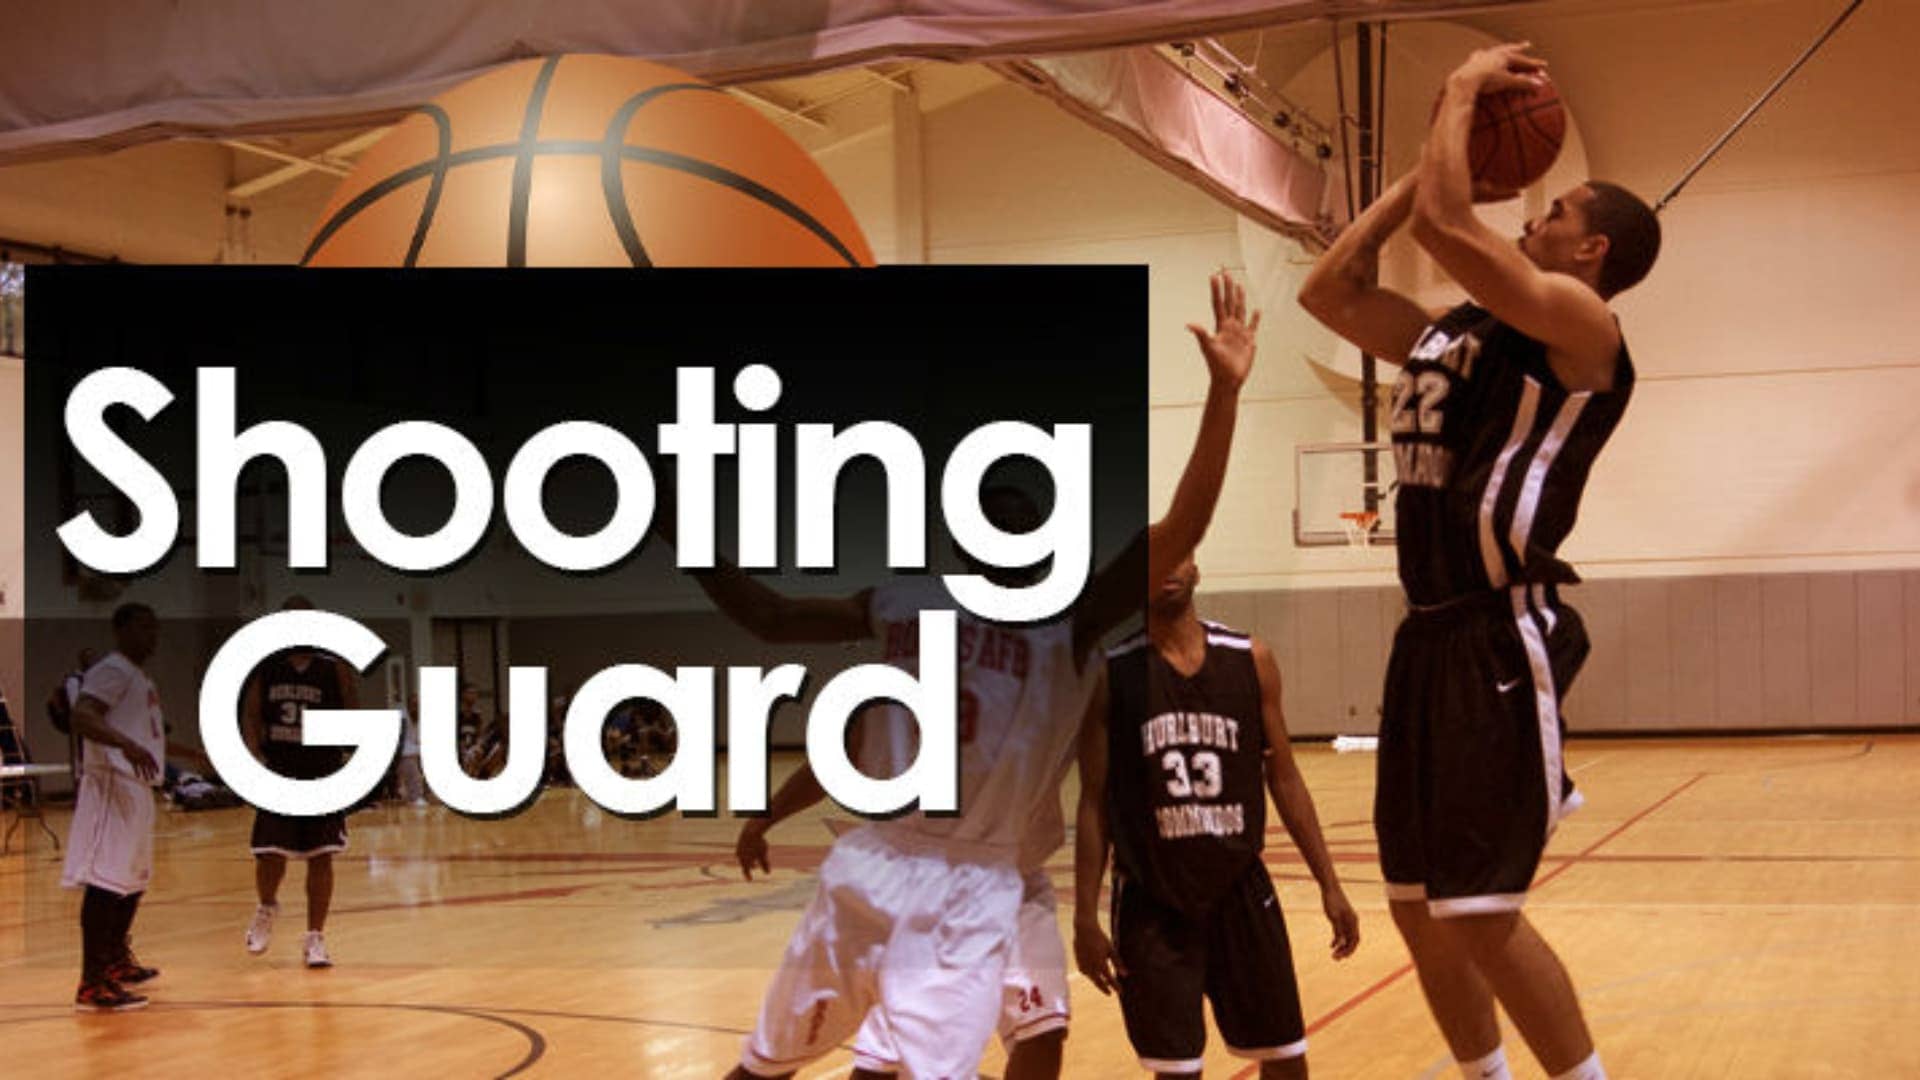 Shooting Guard- what are basketball positions